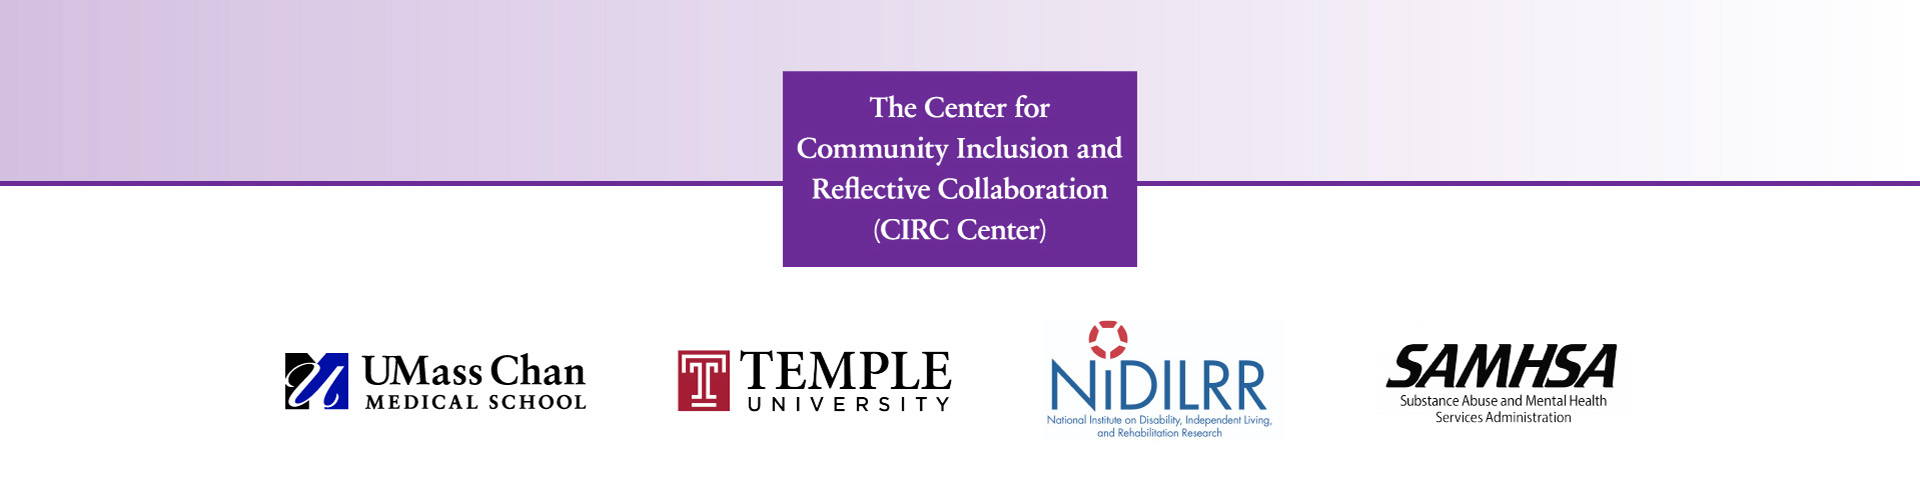 circ center text with university and funder logos